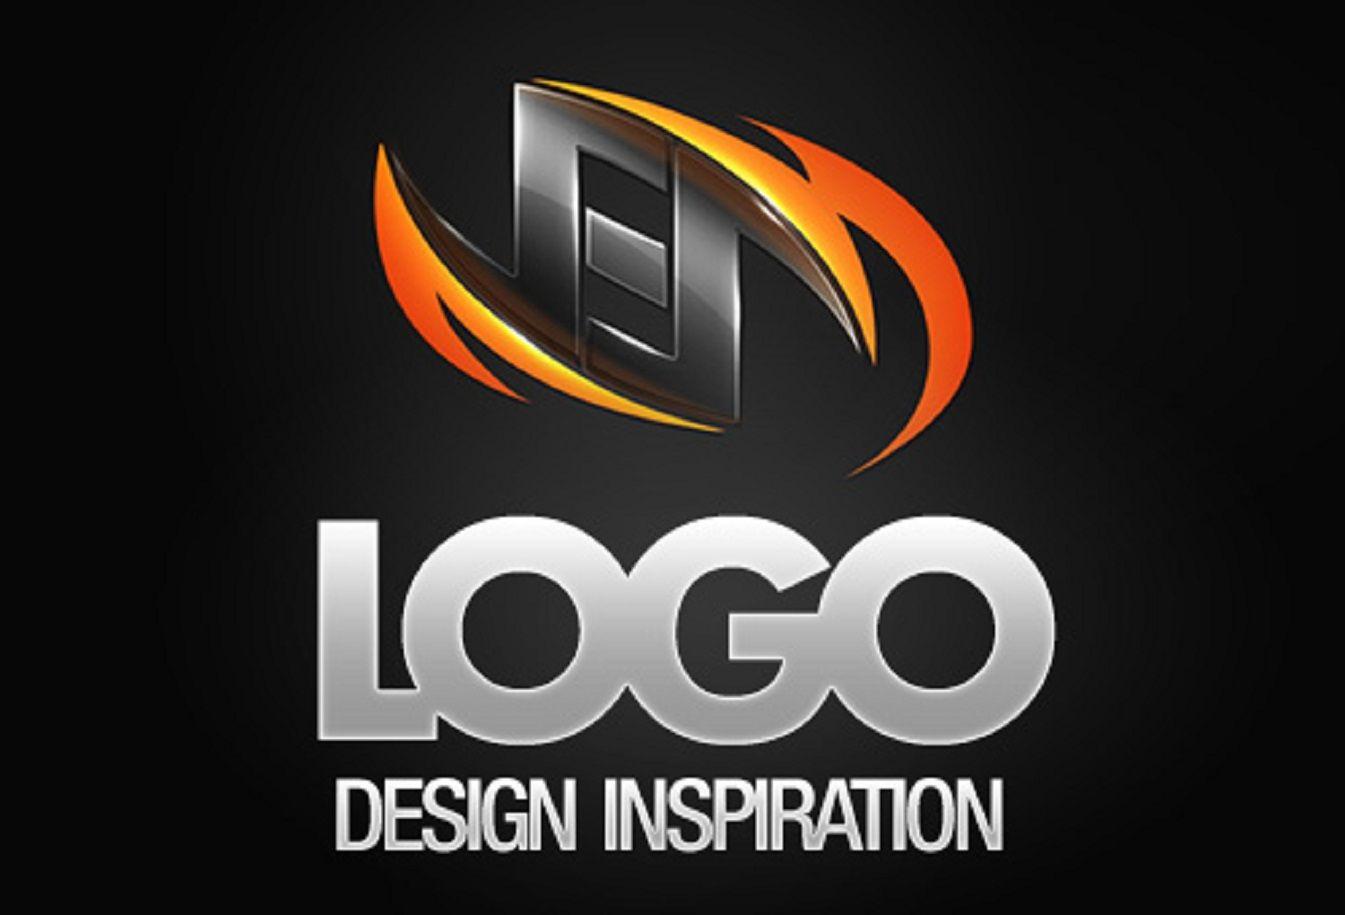 Awesome Logo - I will design 2 AWESOME and Professional logo design Concepts for ...